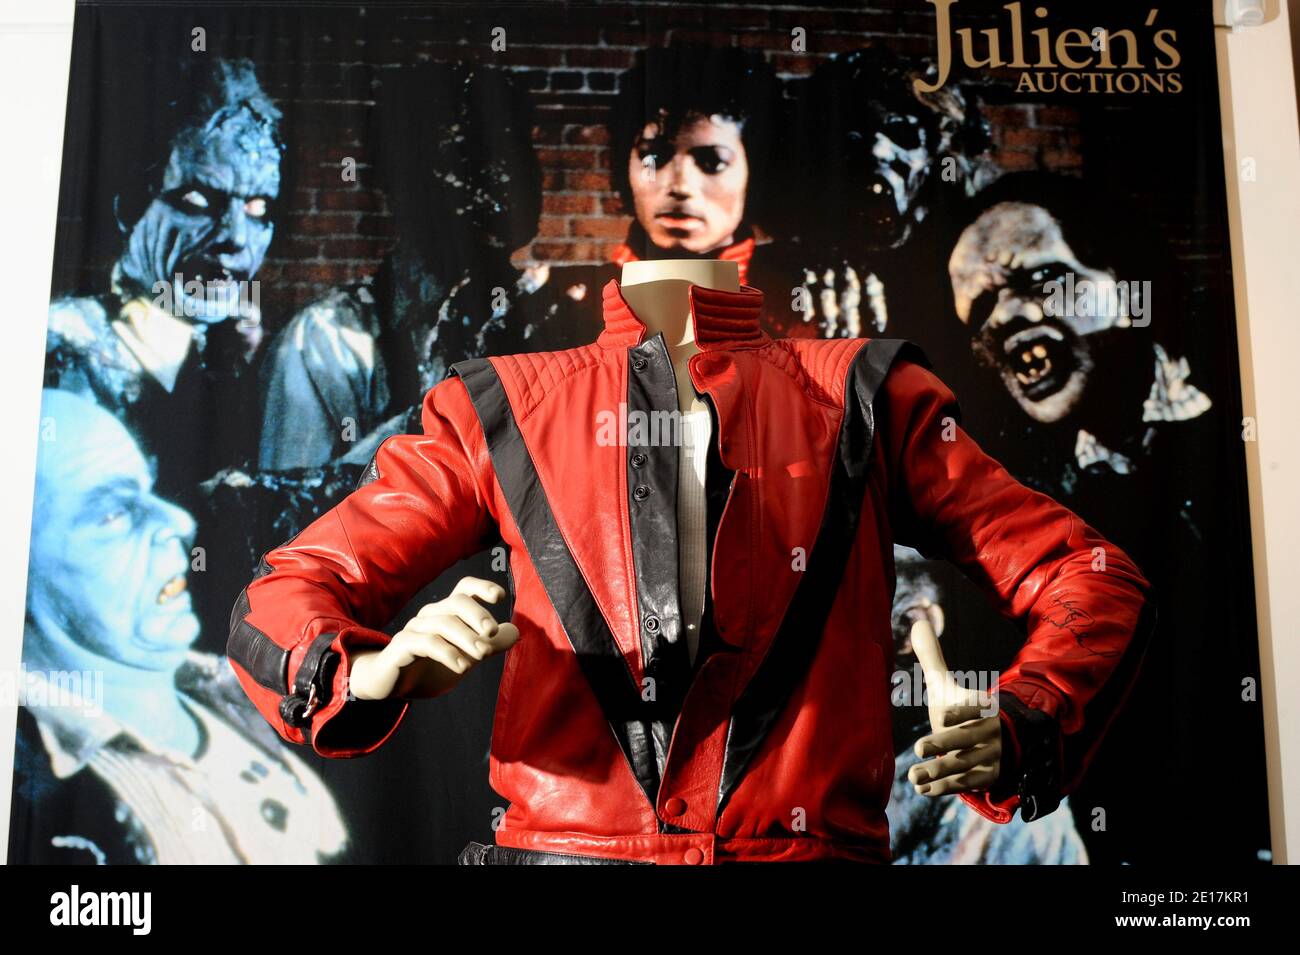 Michael Jackson's video-worn 'Thriller' jacket to be offered to the public on Saturday, June 25, 2011 and Sunday, June 26, 2011 at the Julien's Auctions Gallery in Beverly Hills, Los Angeles, CA, USA on June 13, 2011. The item 493 is estimated at $200.000 to $400.000. Photo by Lionel Hahn/ABACAPRESS.COM Stock Photo